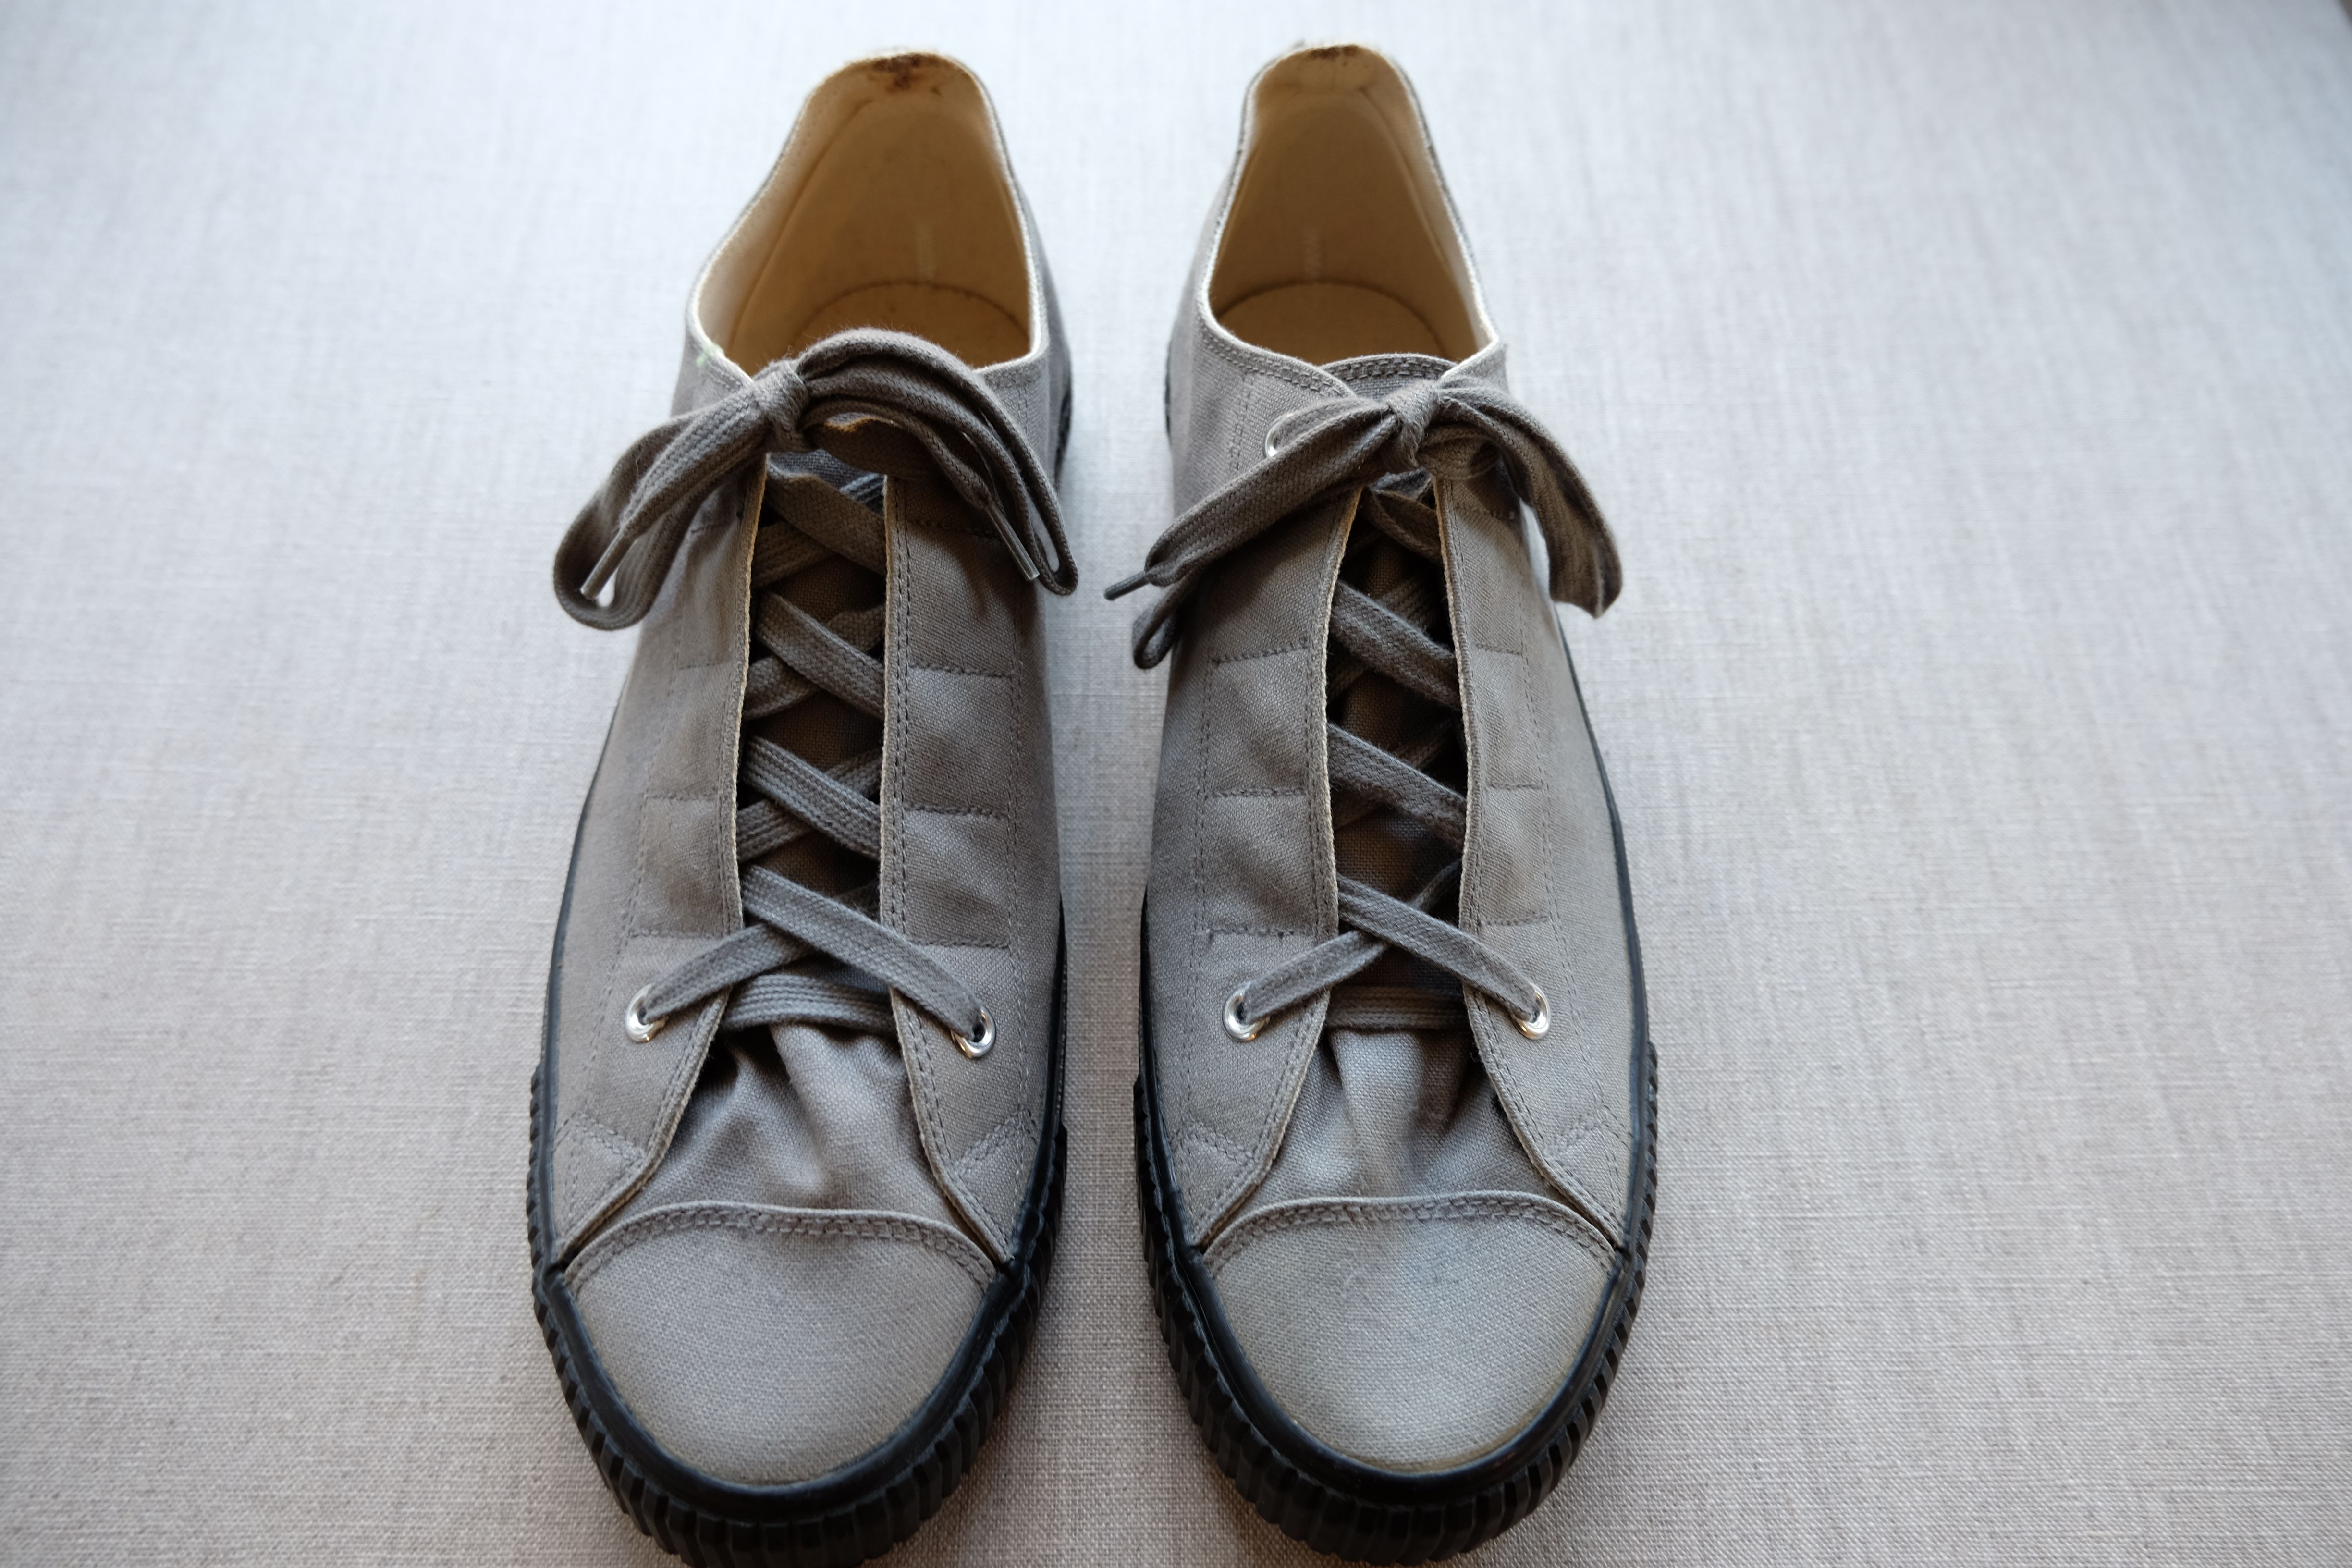 SS16-Runway Canvas Shoes with Hidden Eyelets - 3